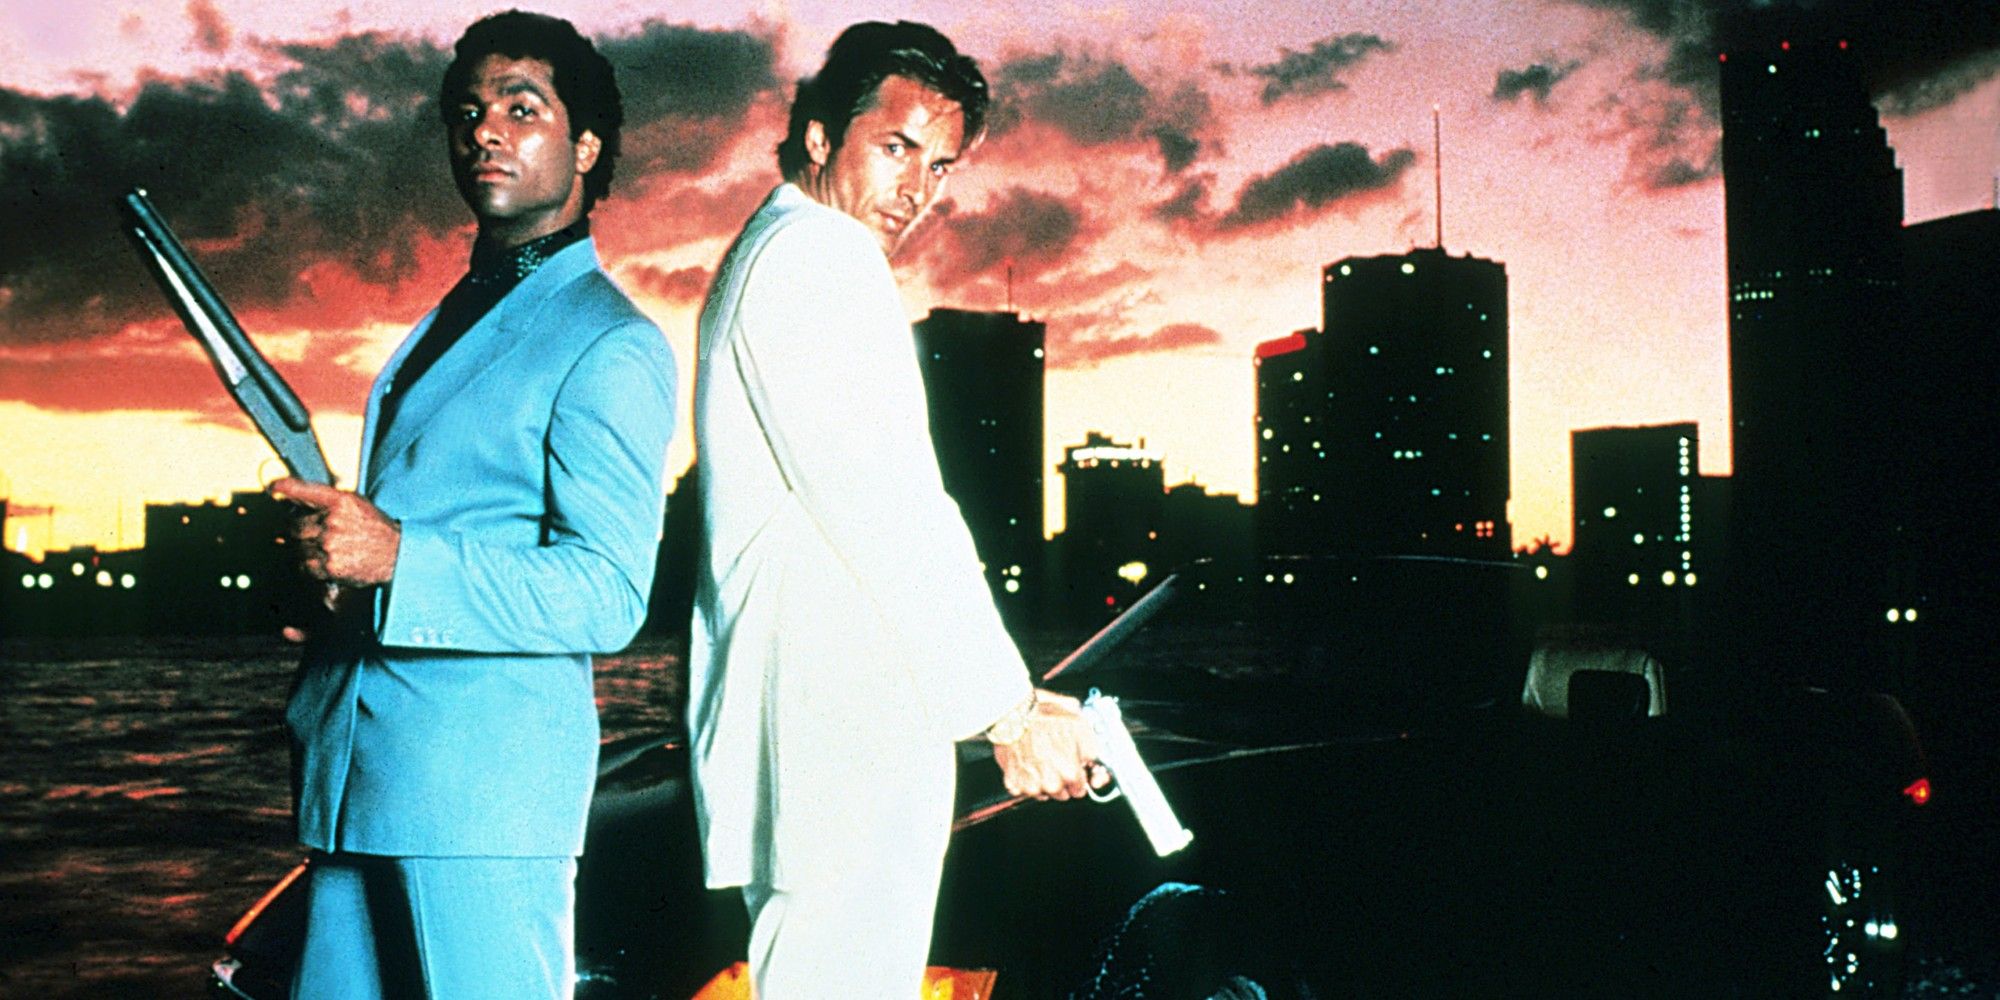 A poster for Miami Vice